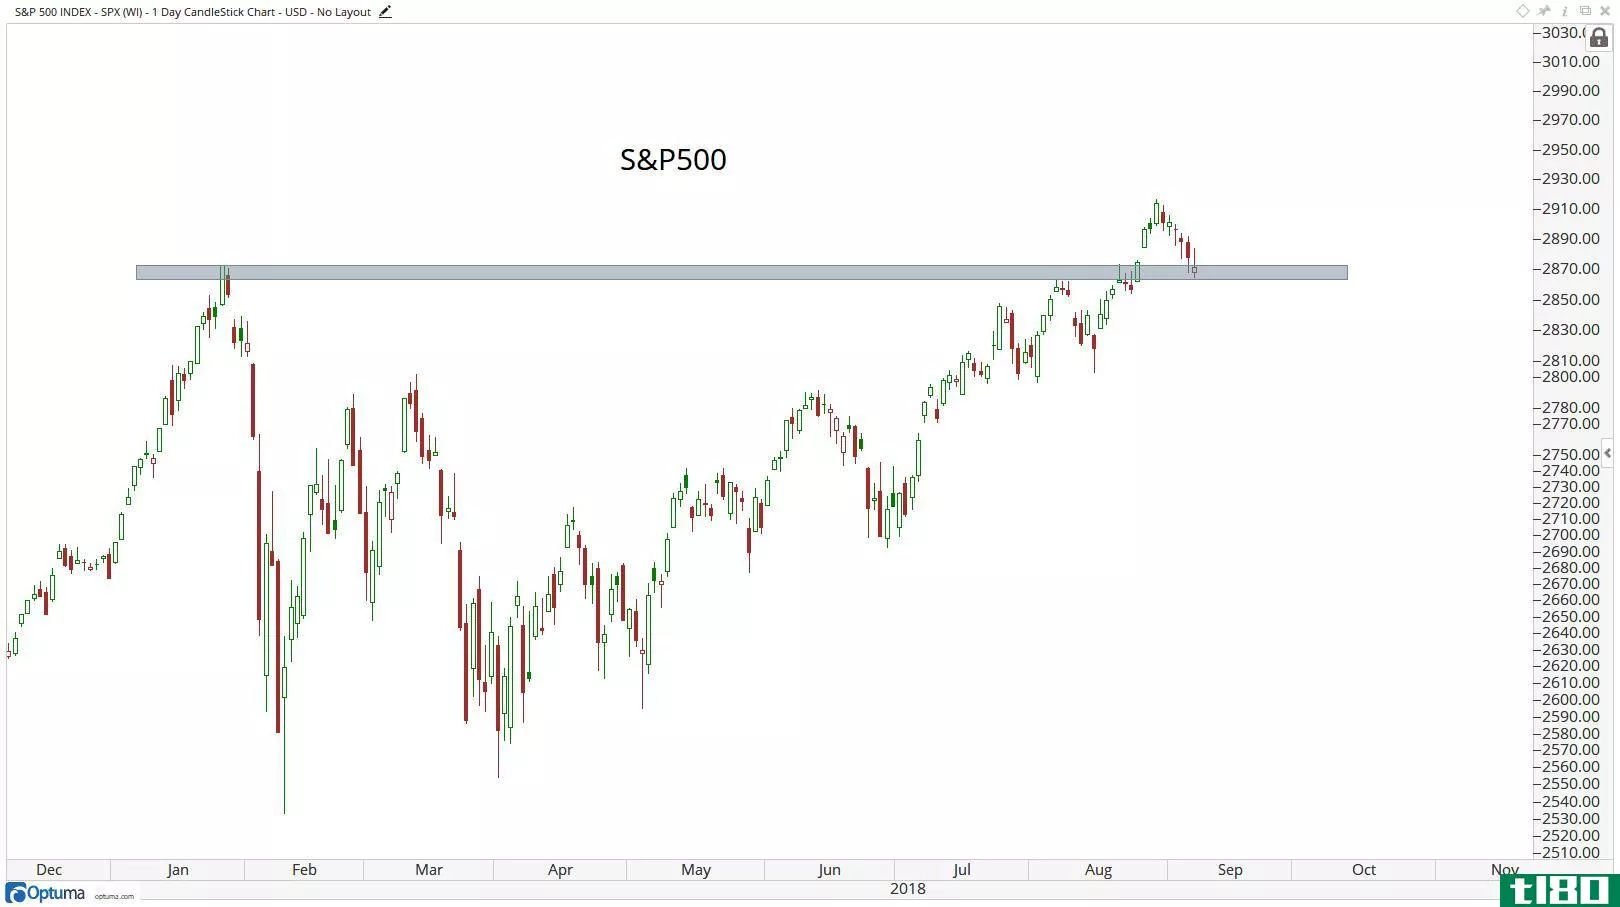 Technical chart showing the performance of the S&P 500 index